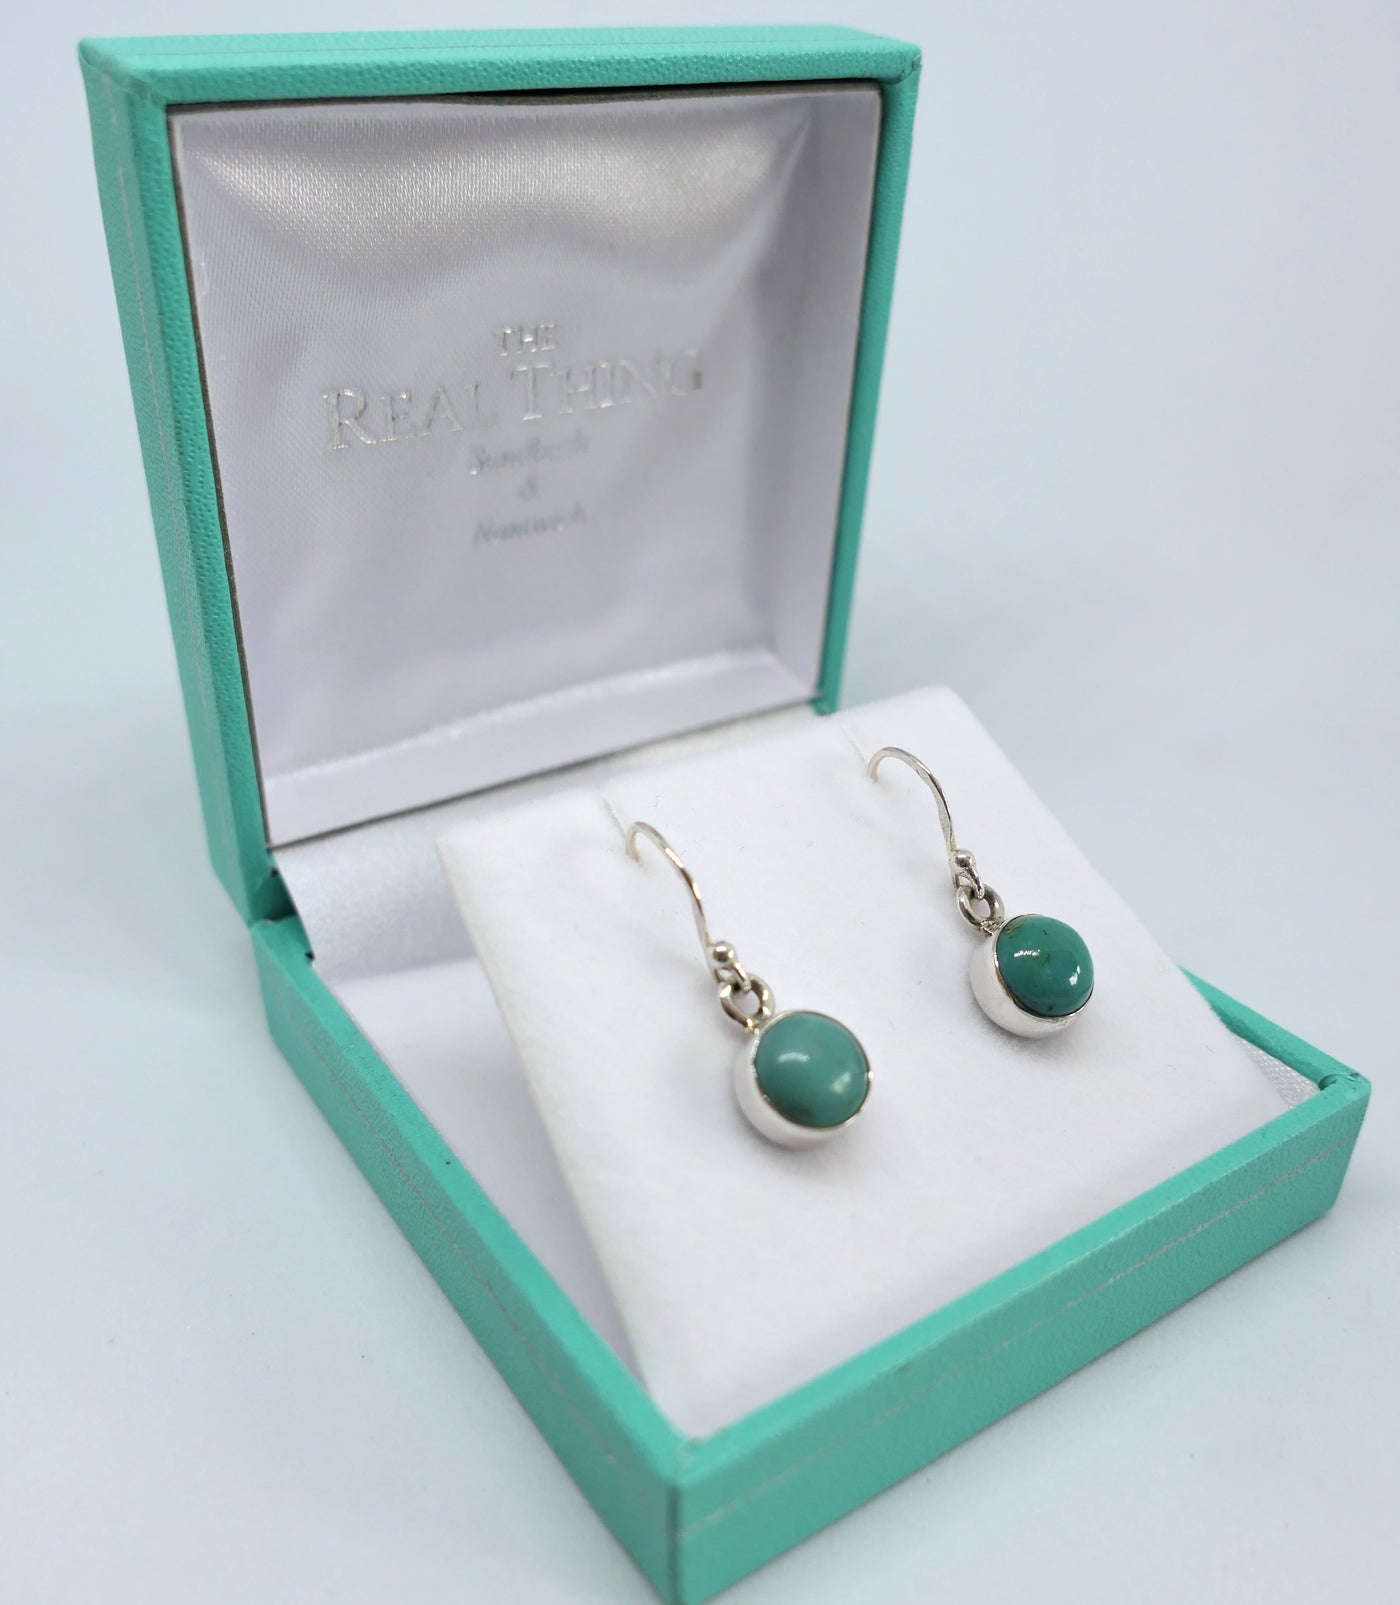 Round Turquoise Drop Earrings